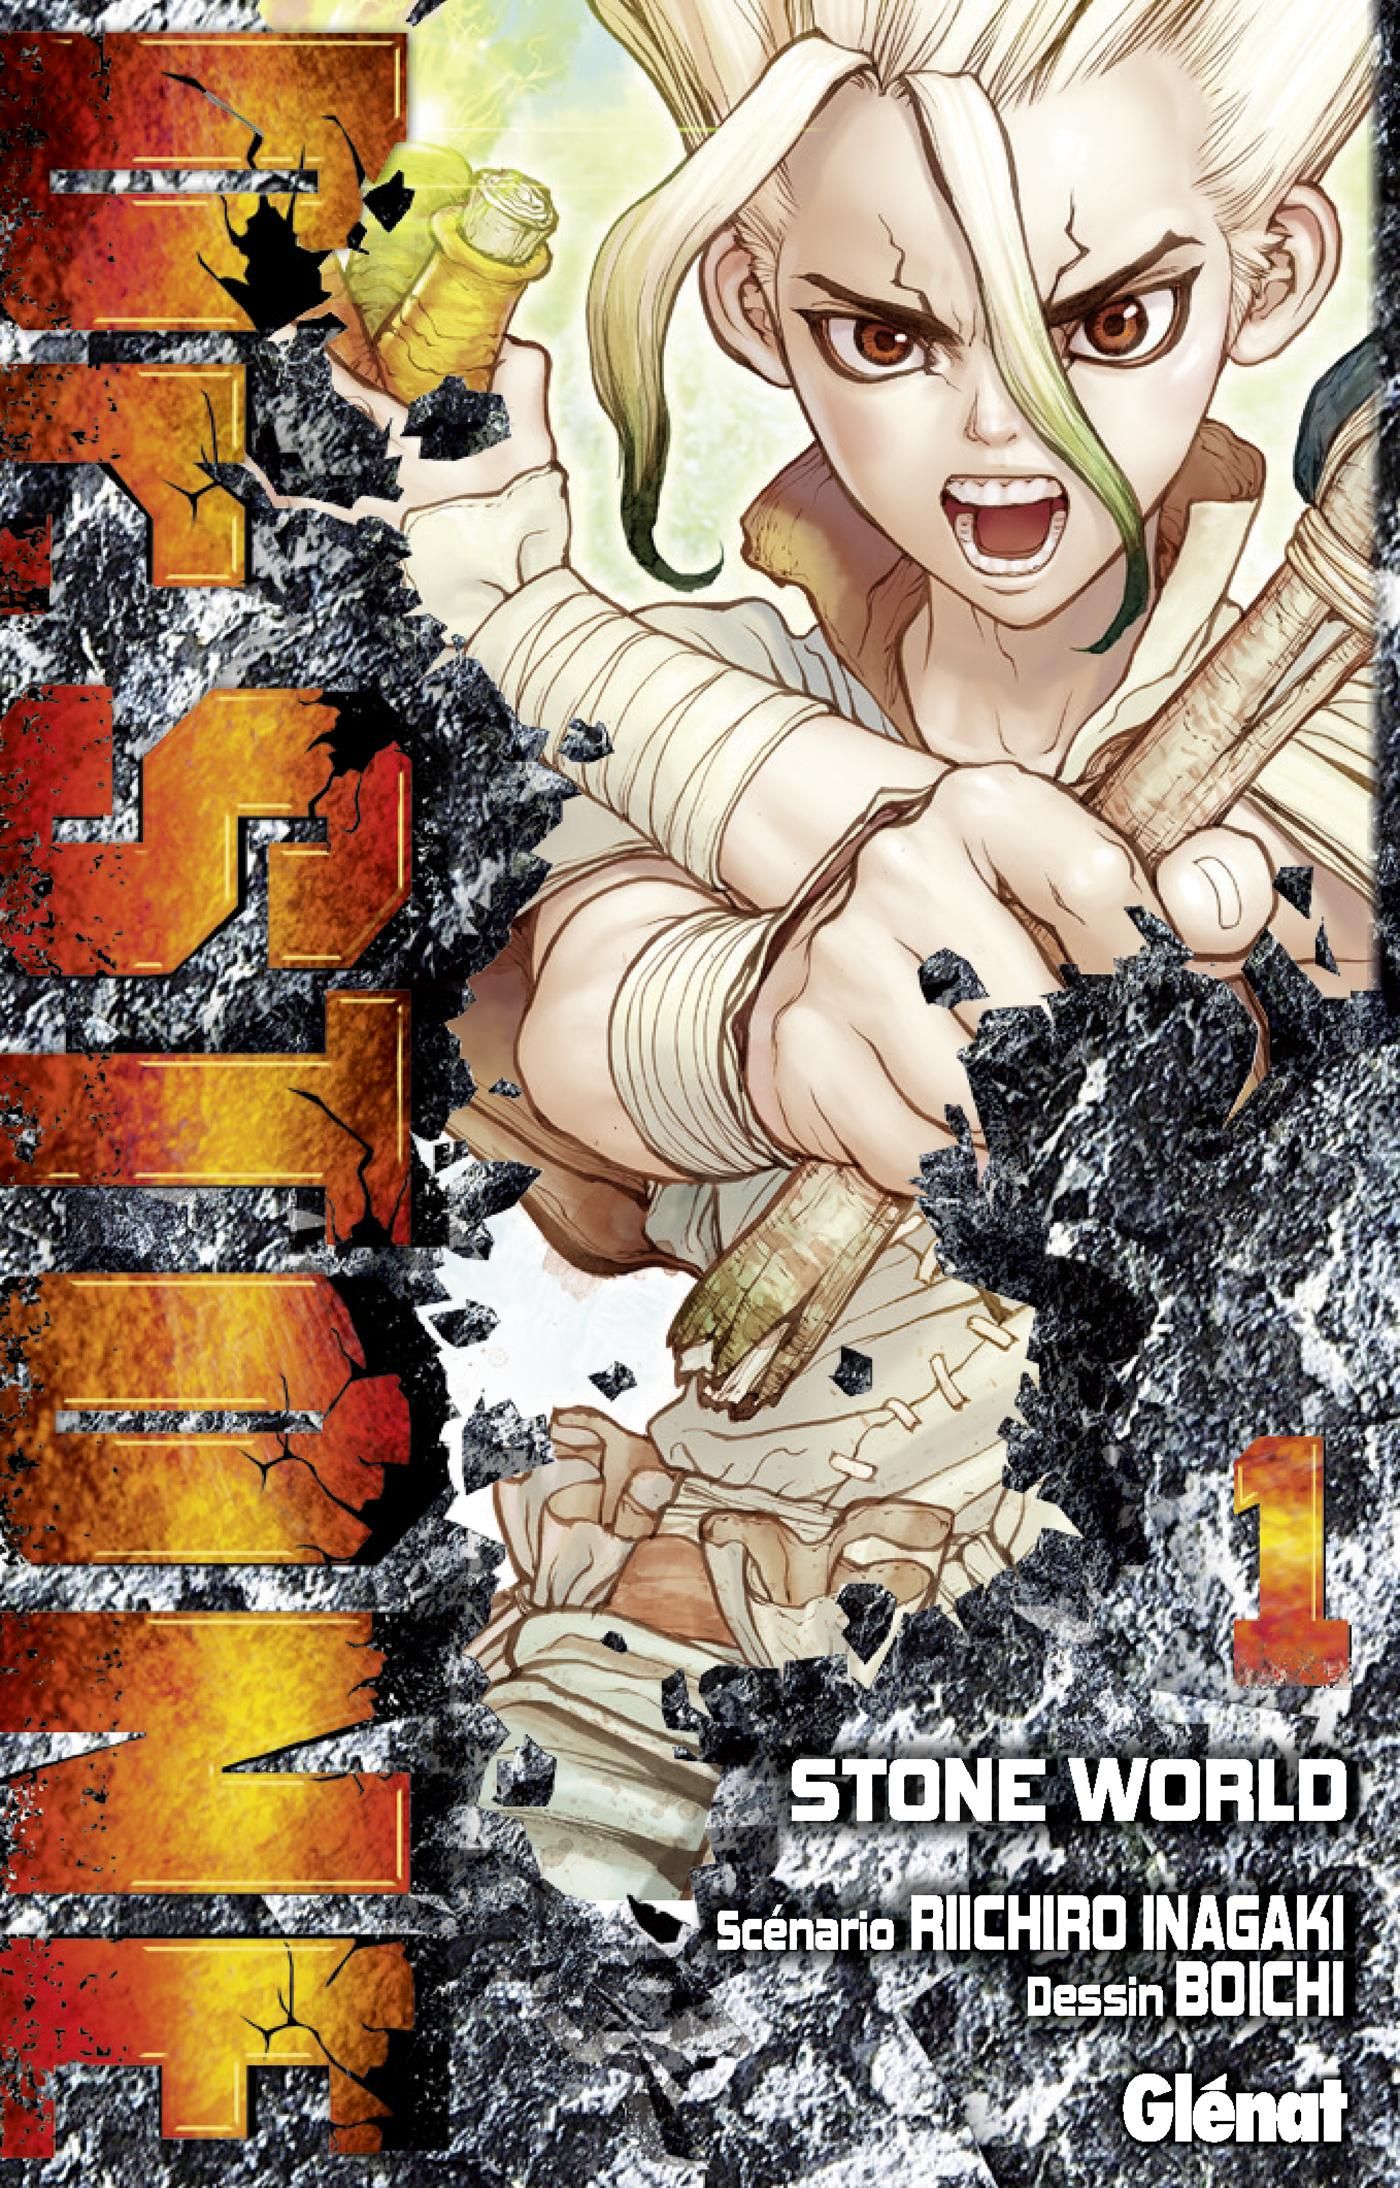 Dr Stone T1